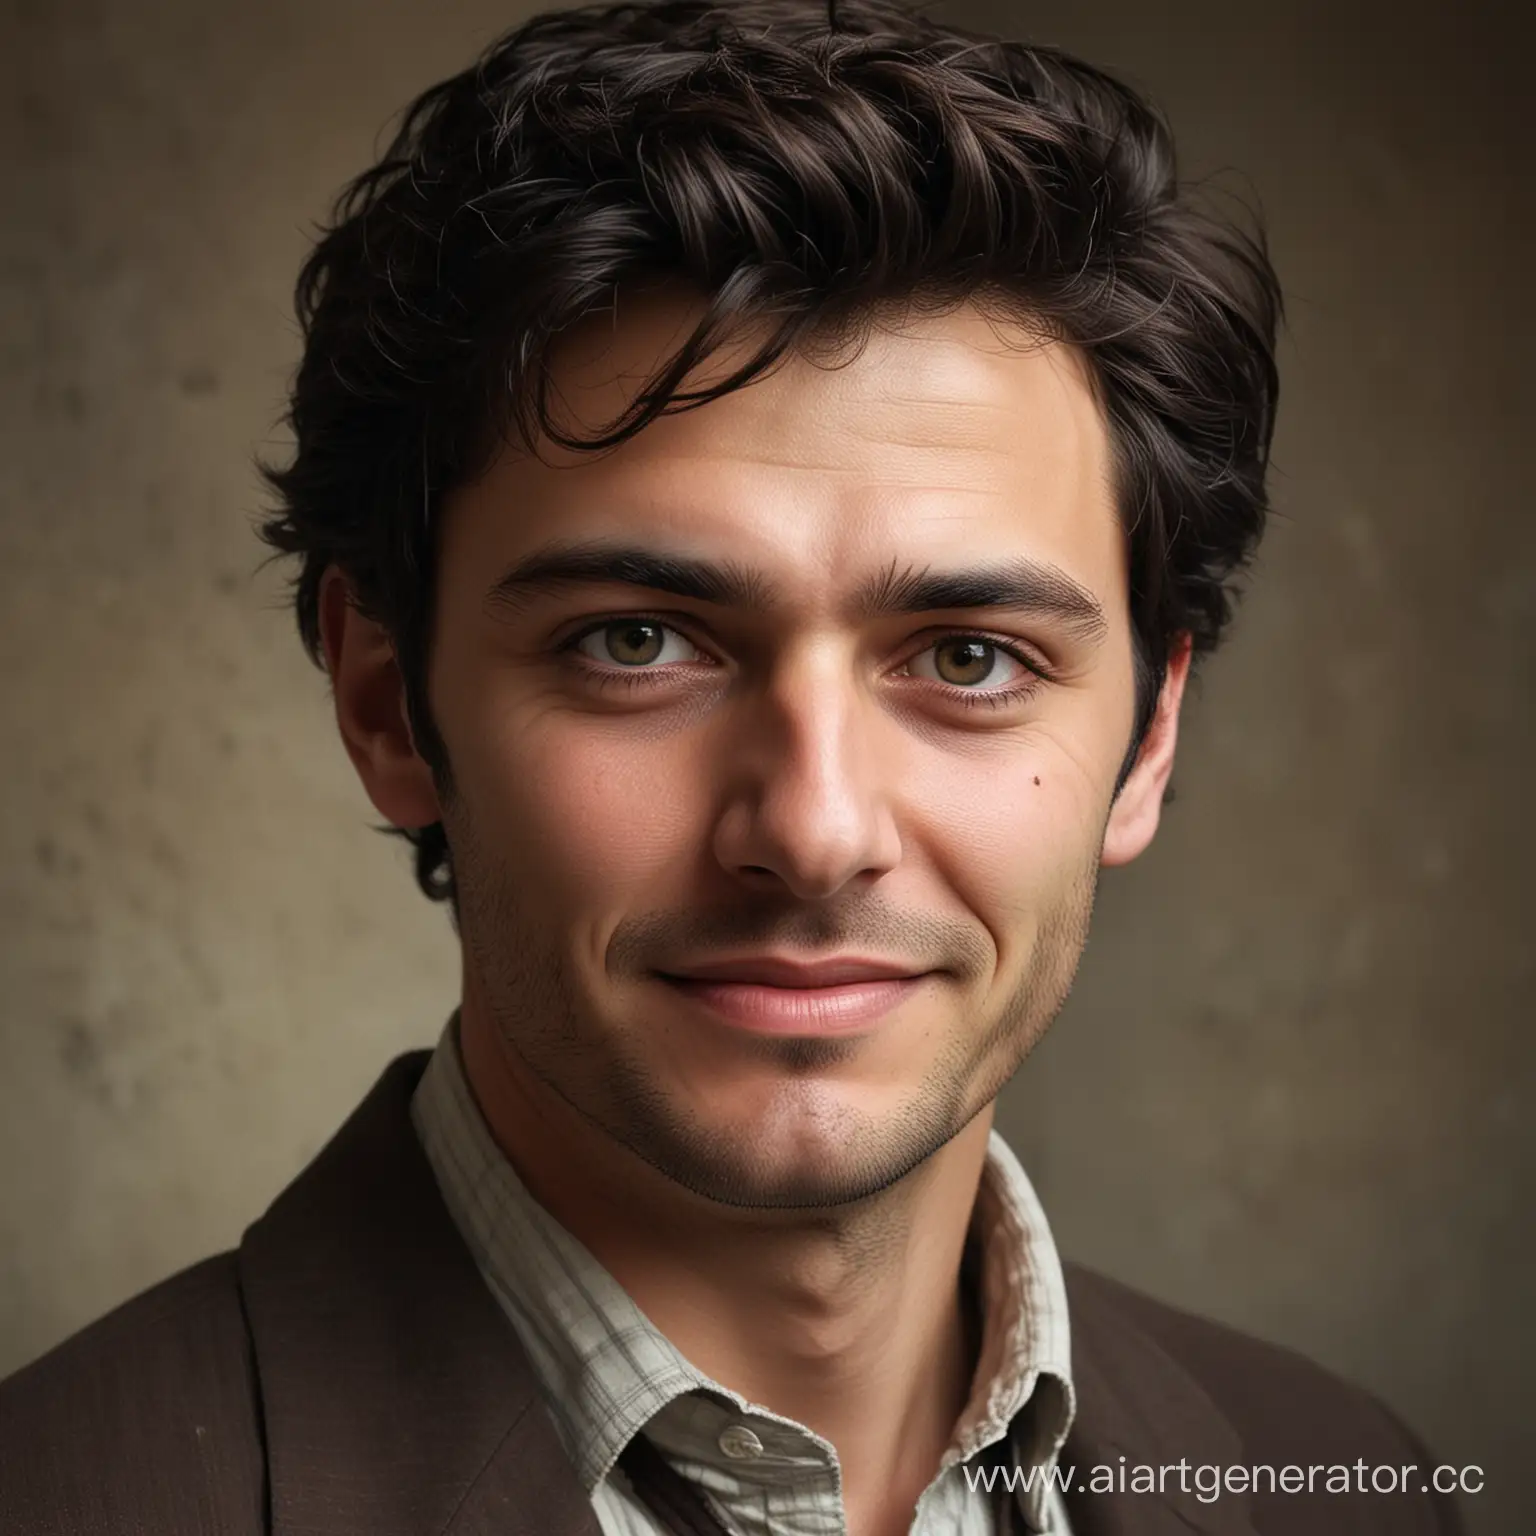 Mysterious-DarkHaired-Man-with-Intense-Gaze-and-Cryptic-Smile